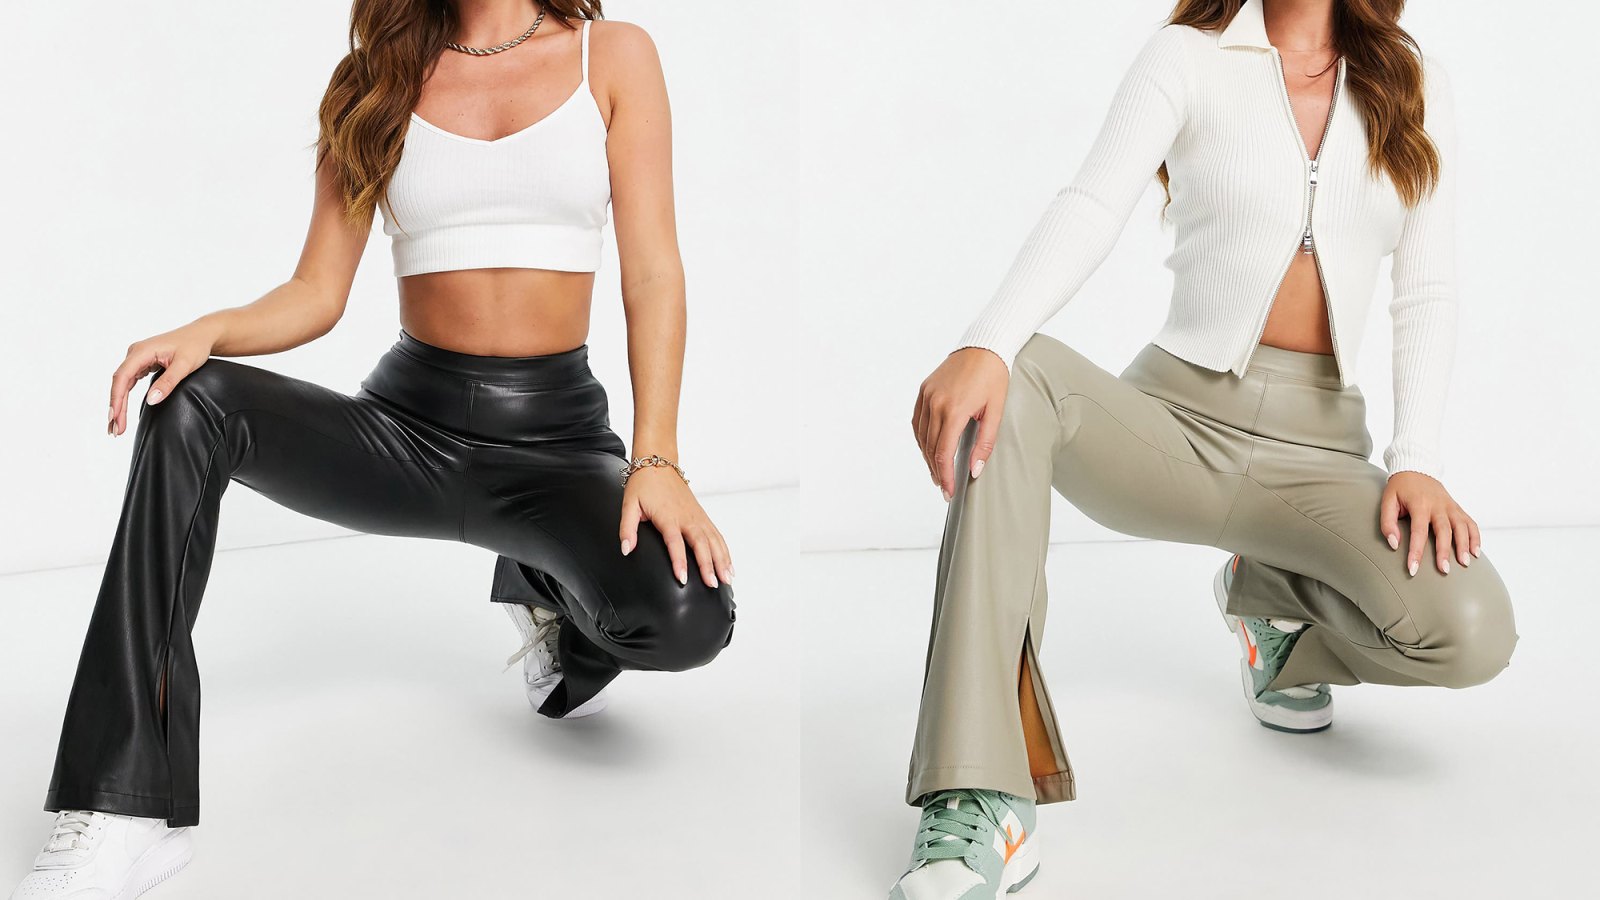 Topshop Faux Leather Pants Make Wearing This Trend Super Comfy